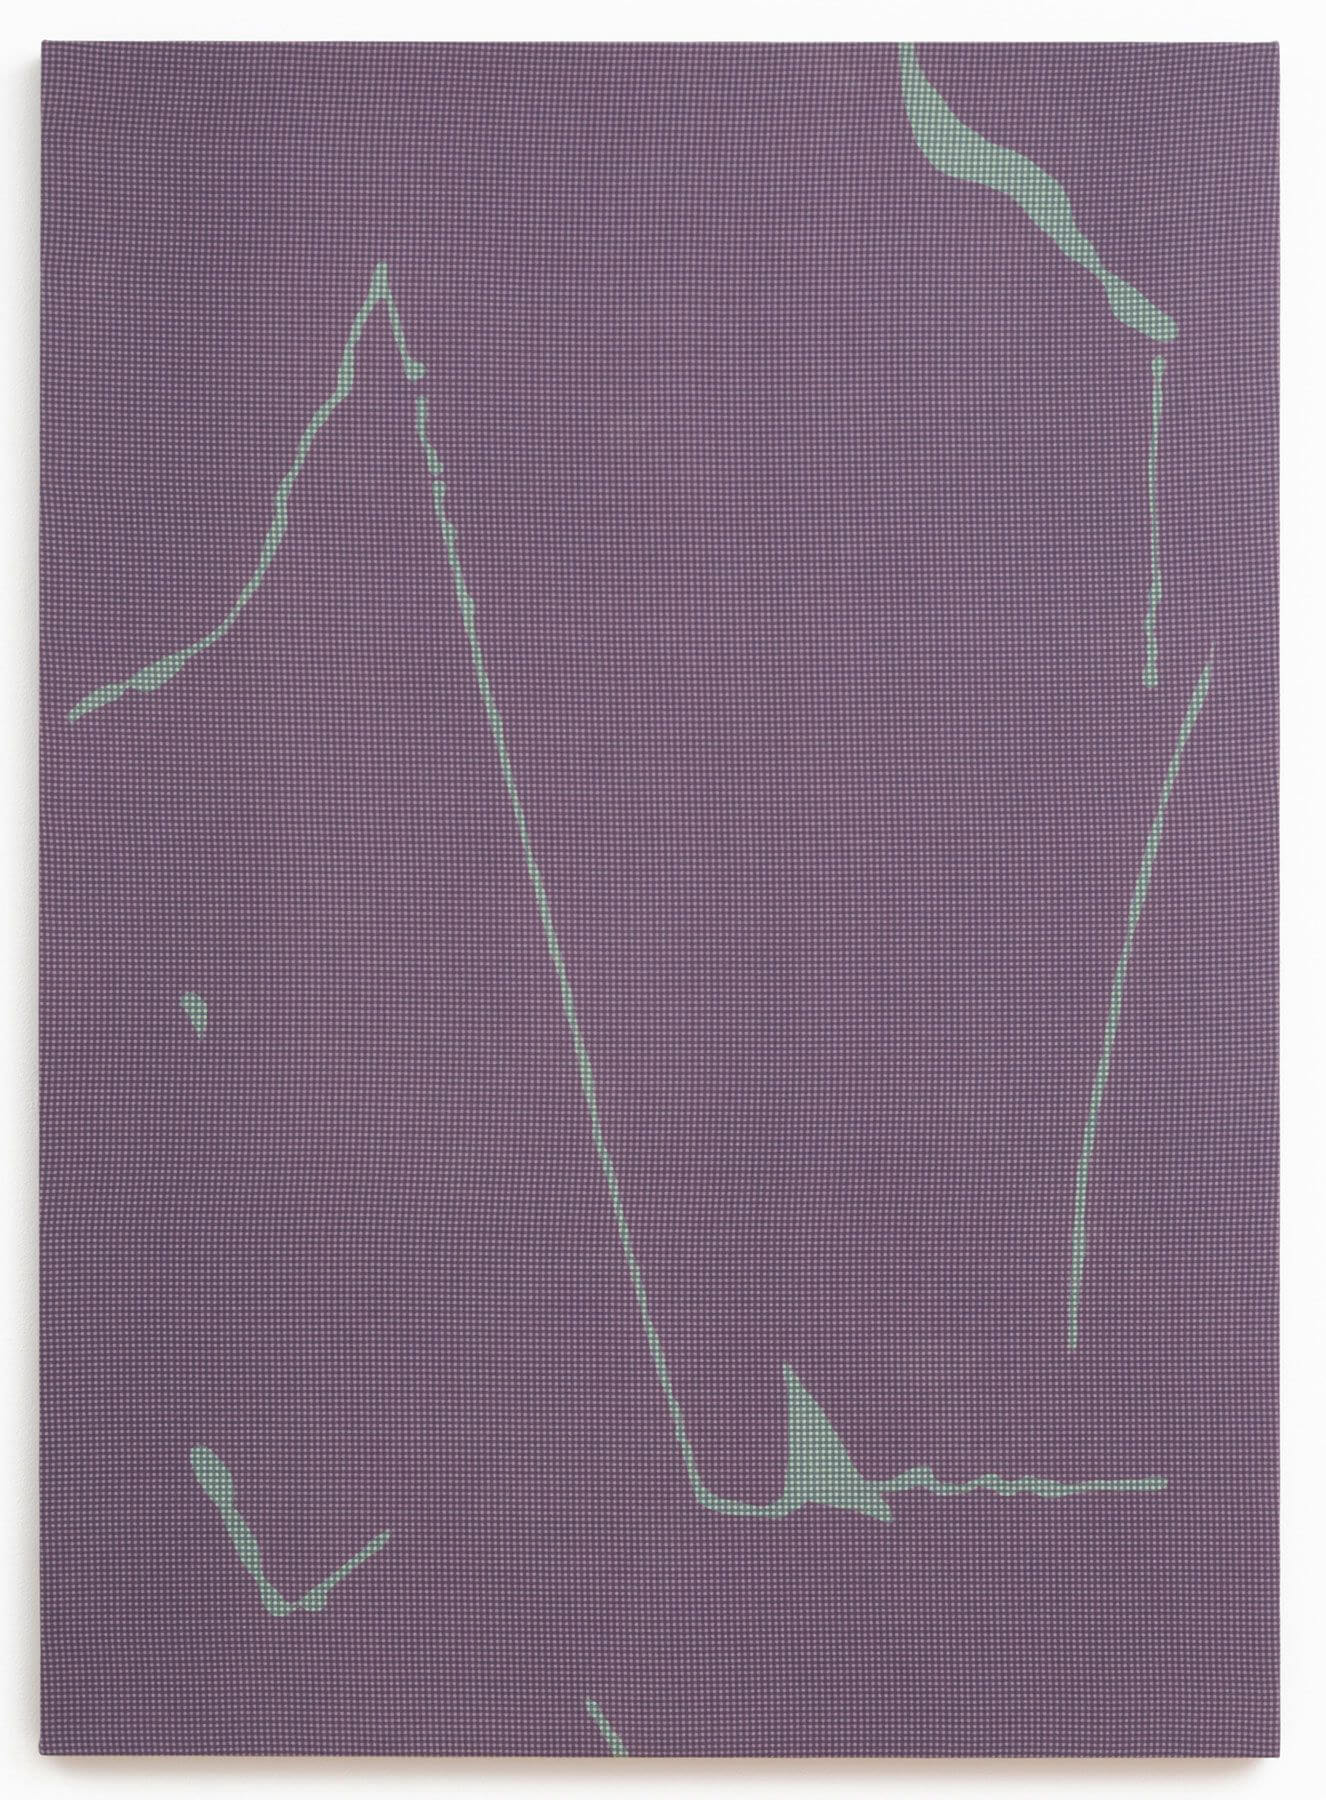 Cheryl Donegan
                                        'Untitled Resist (muave and faded green)', 2014
                                        50 x 36 Inches
                                        dyed cotton
                                        